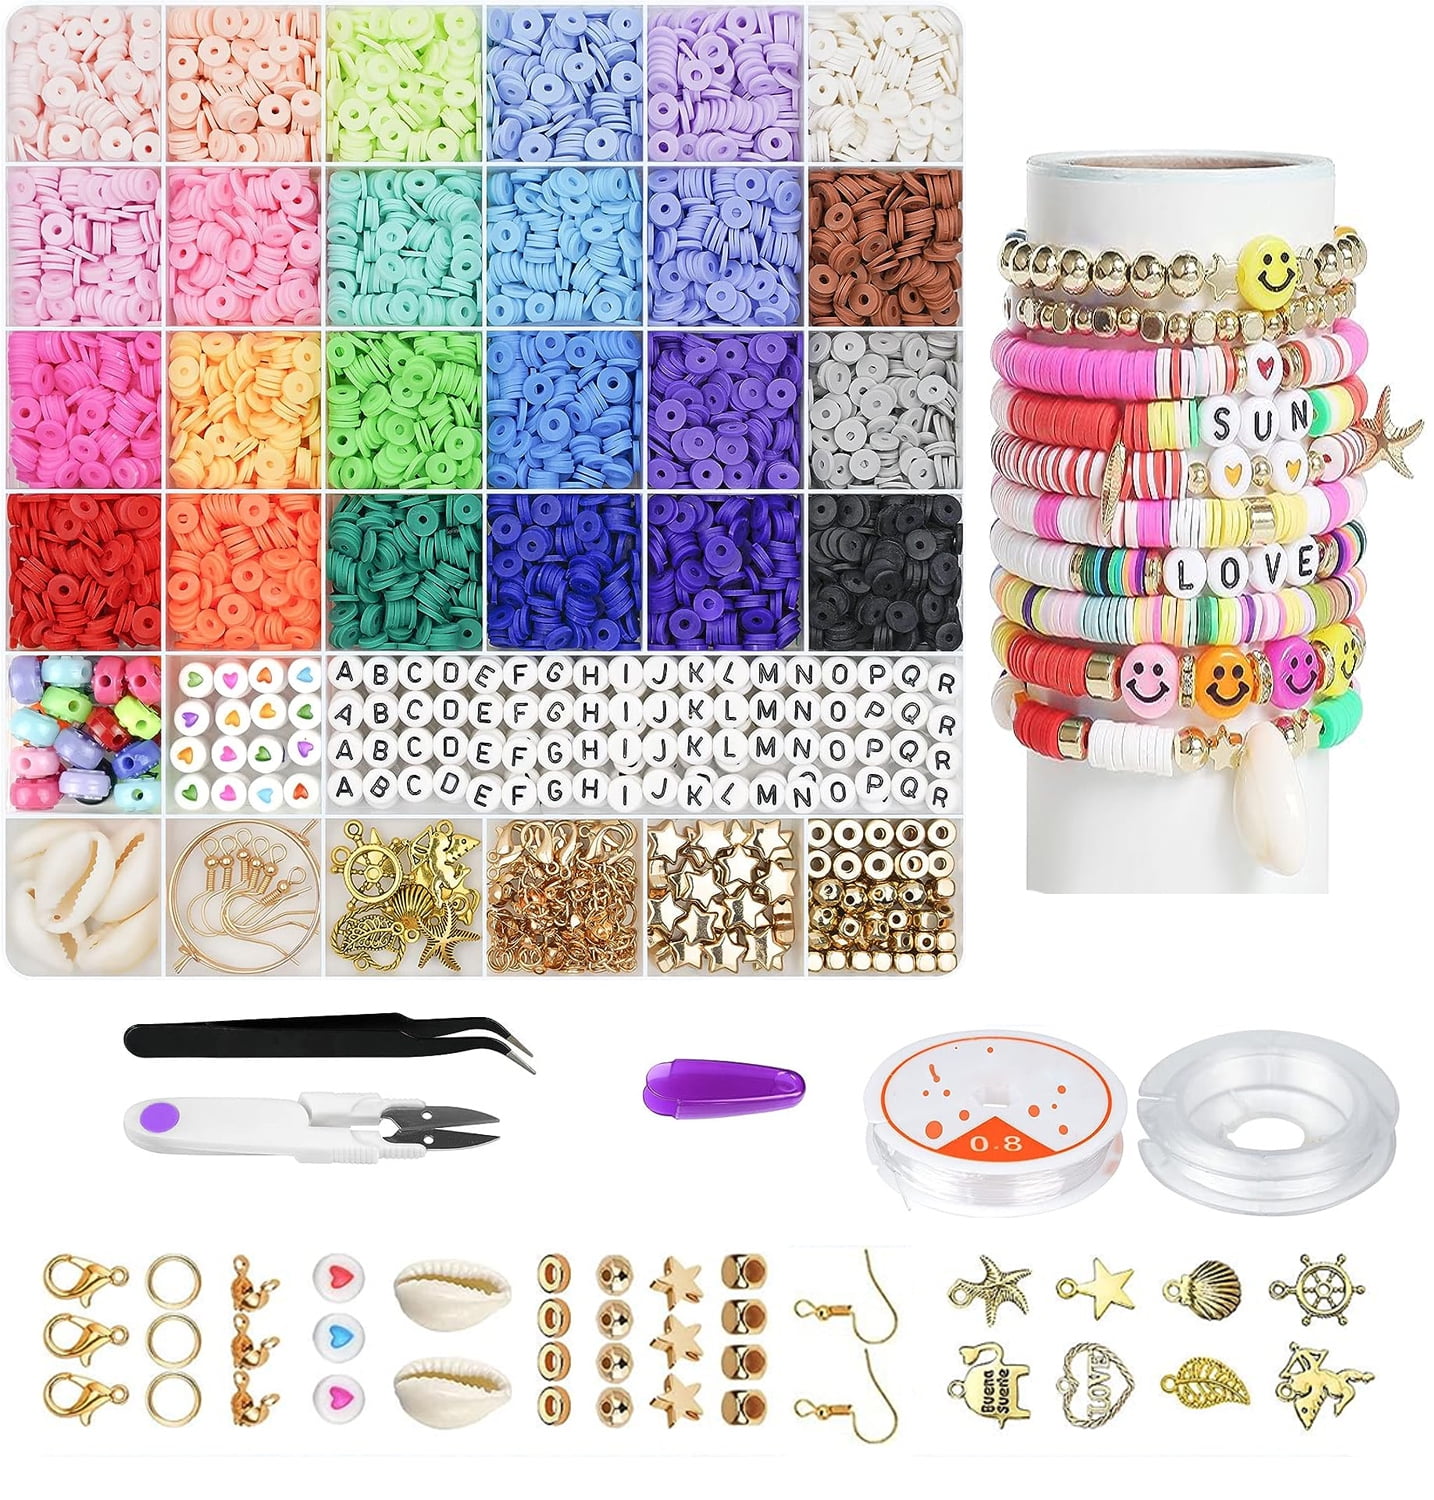 24 Grids Bracelet Making Kit, Beads for Bracelets Making Pony Beads Polymer  Clay Beads for Jewelry Making, DIY Arts and Crafts Gifts 